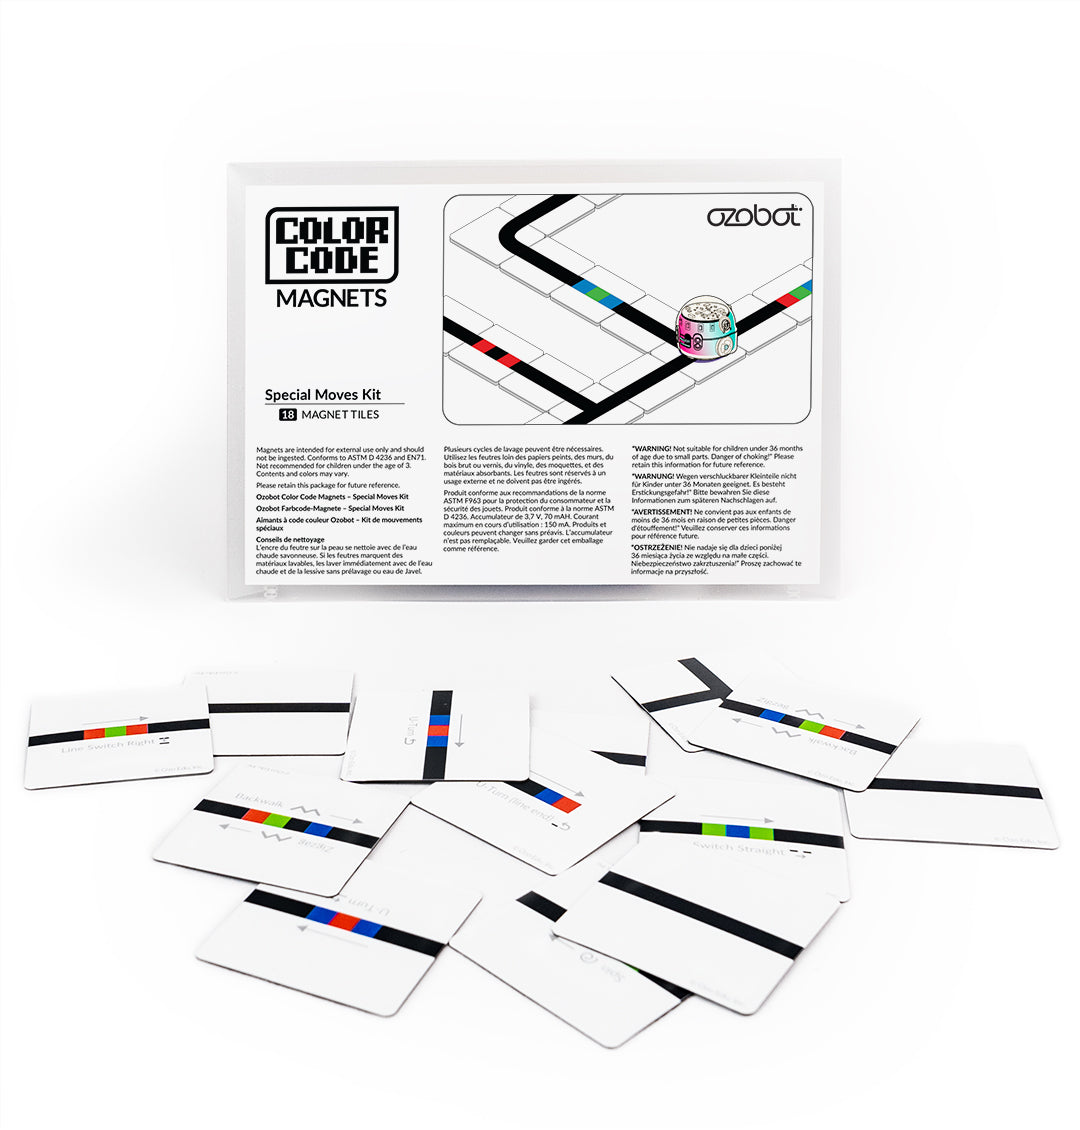 Ozobot Color Code Magnets Special Moves Kit